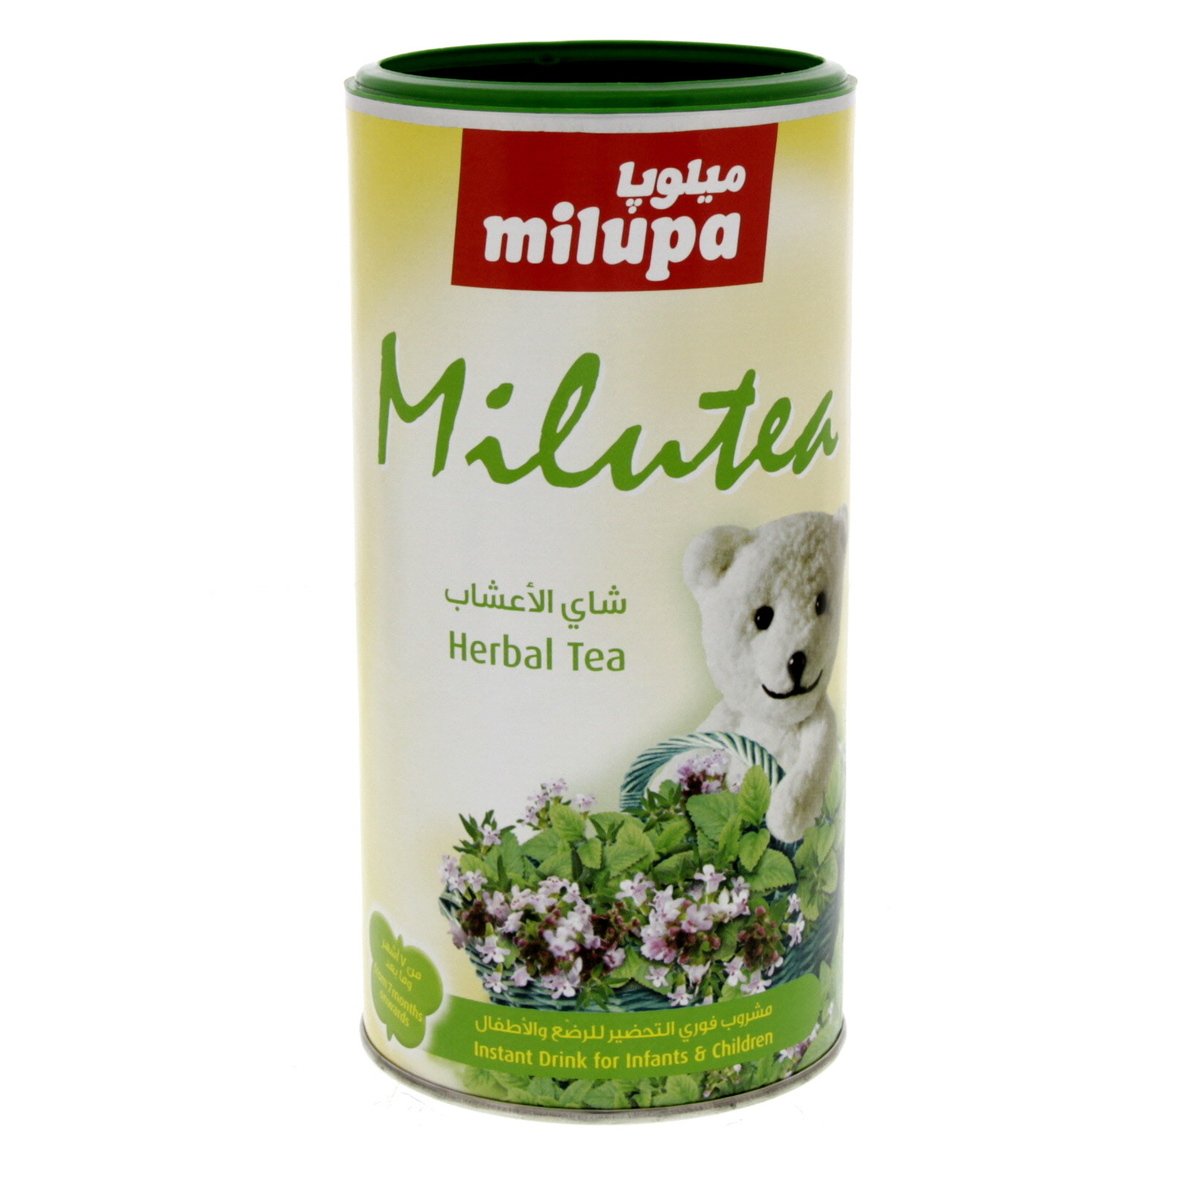 Milupa Herbal Tea Instant Drink For Infants And Children 200g